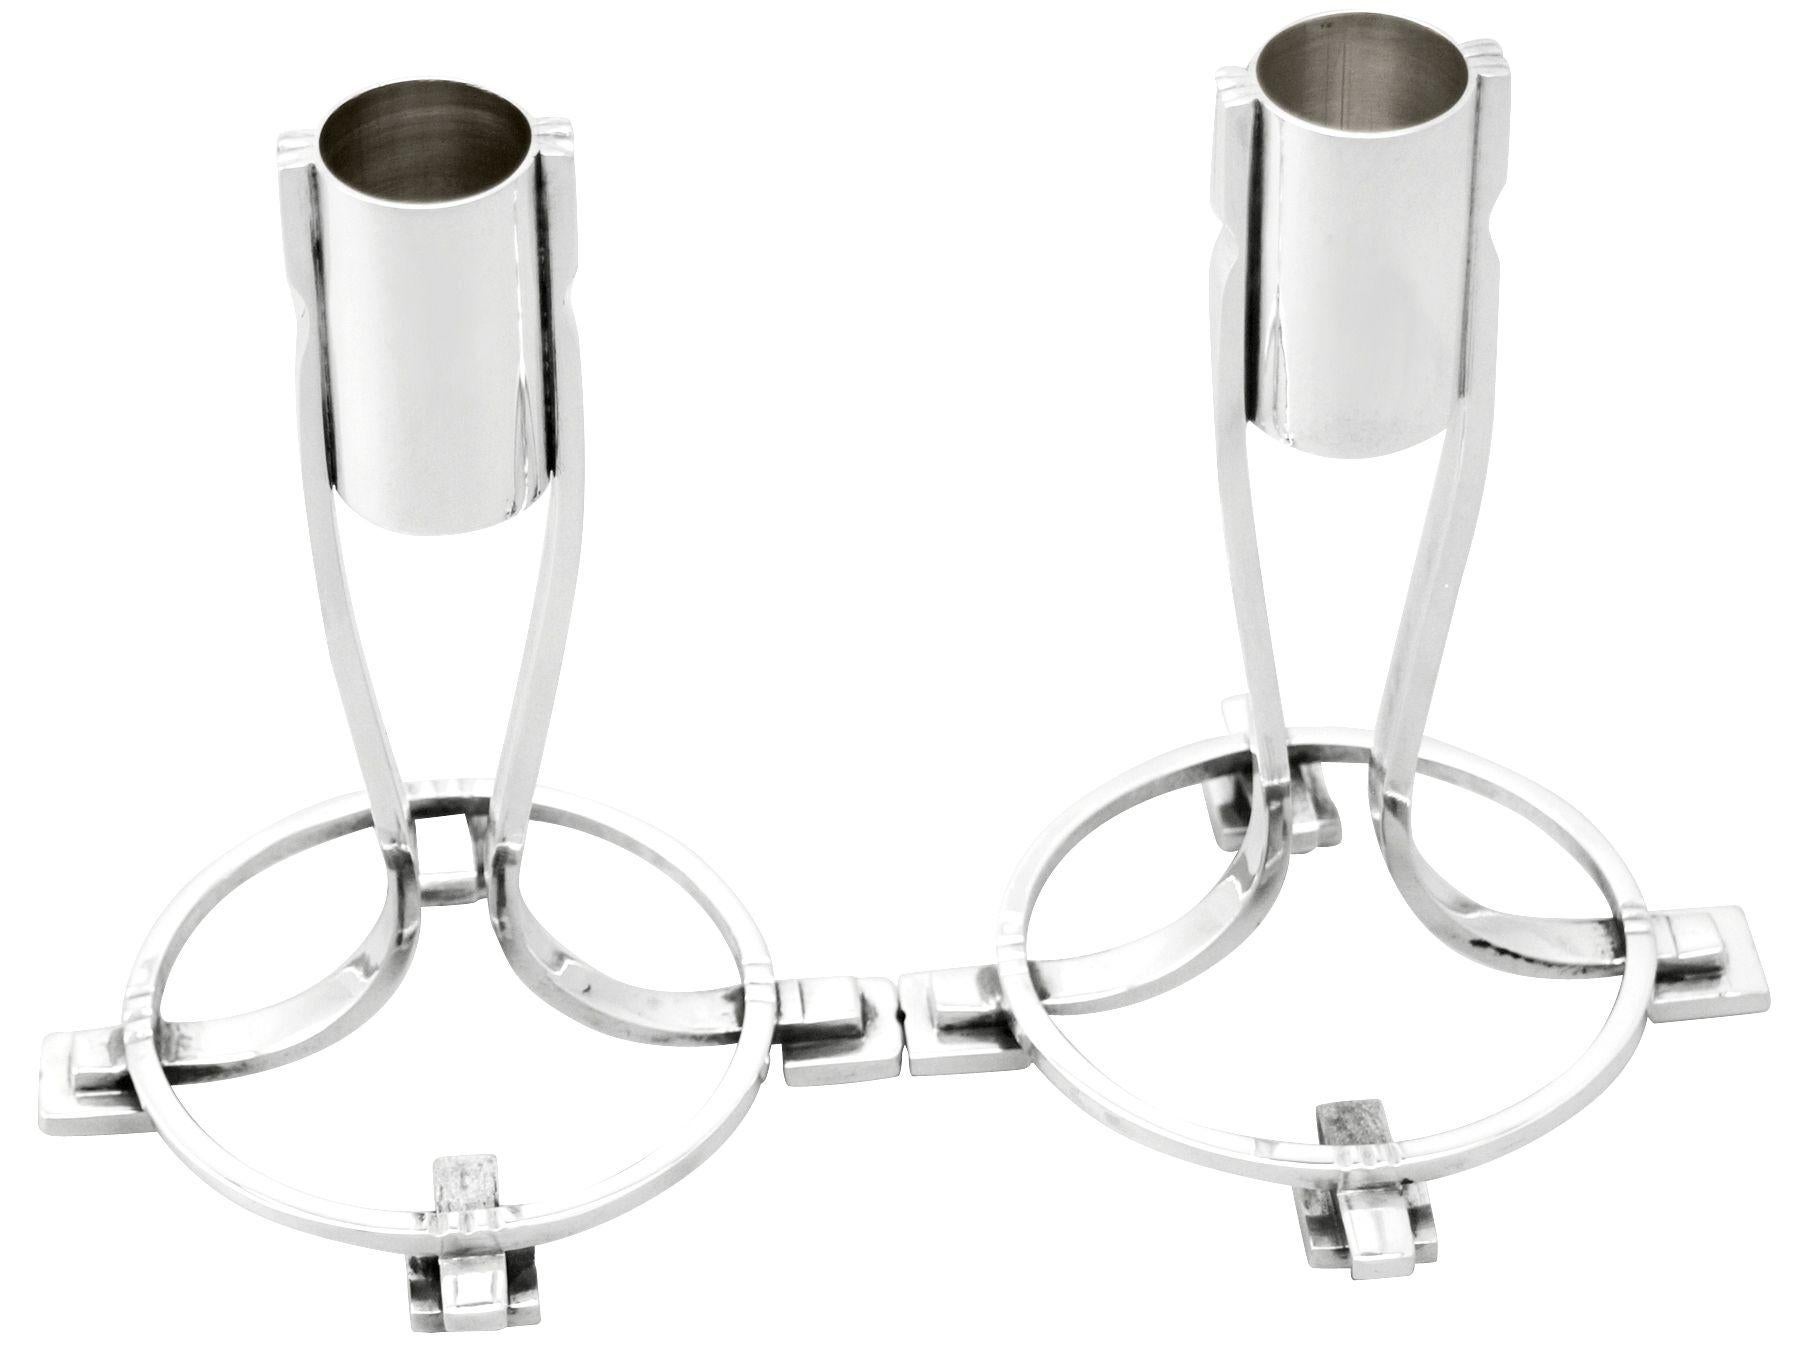 A fine and impressive pair of vintage Elizabeth II English sterling silver candleholders in the Art Deco style; an addition to our ornamental silverware collection.

These vintage Elizabeth II sterling silver candleholders have a circular waisted